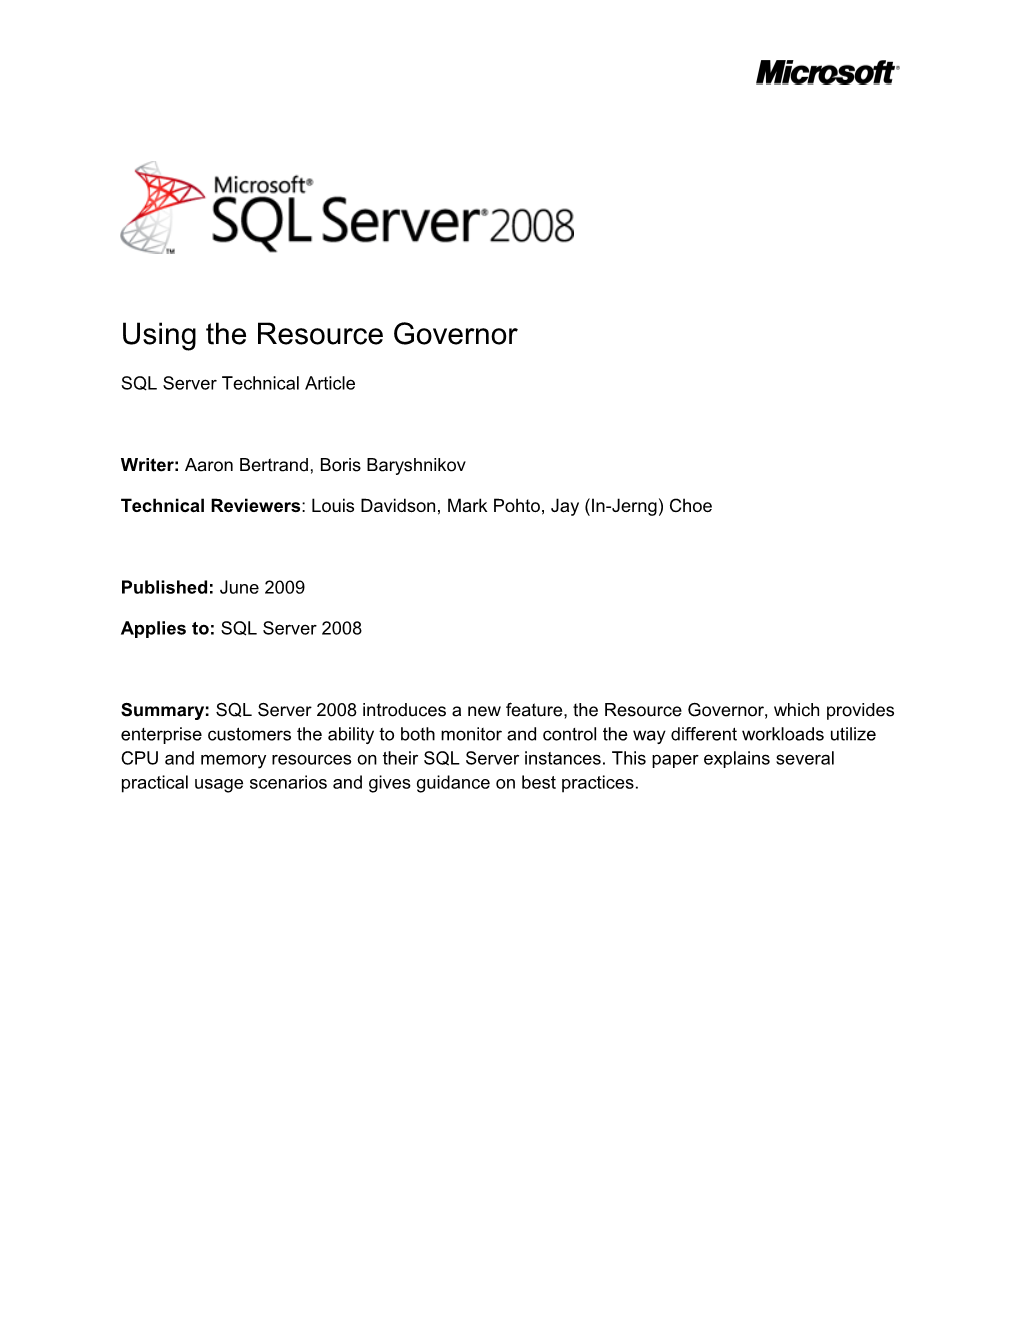 Using the Resource Governor